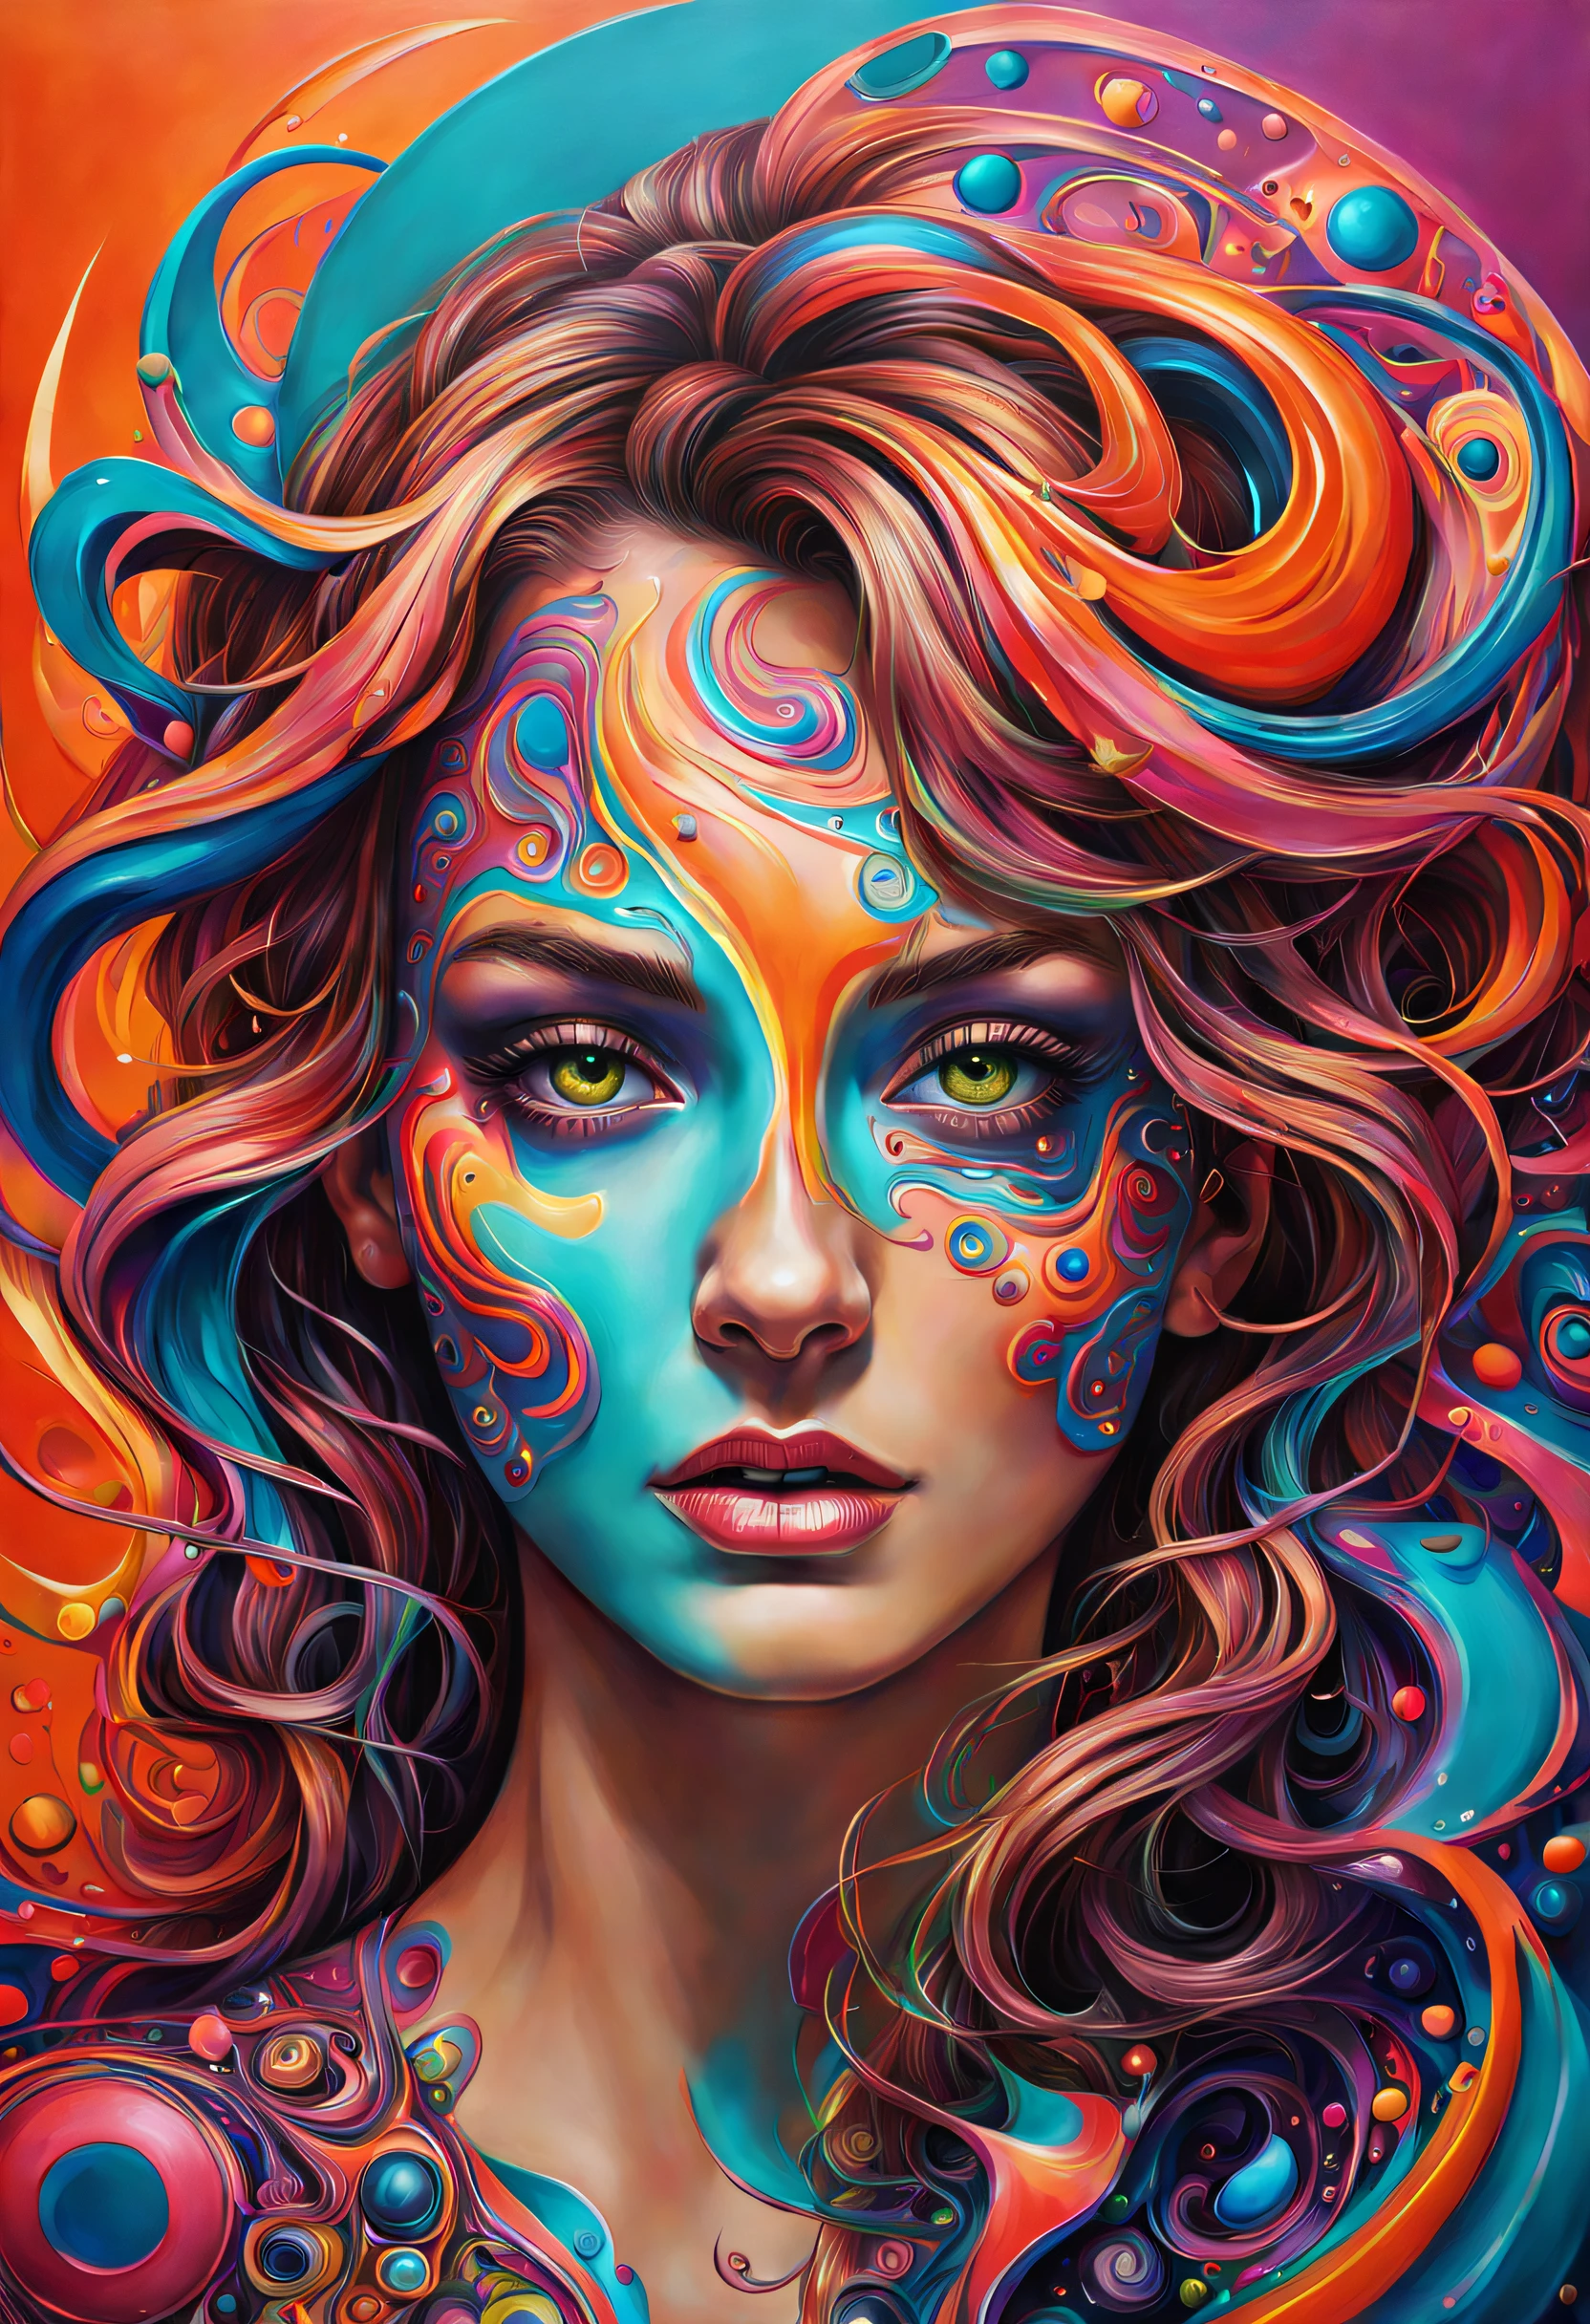 A realistic, psychedelic work full of flashy and brilliant color. It's textured and twisted